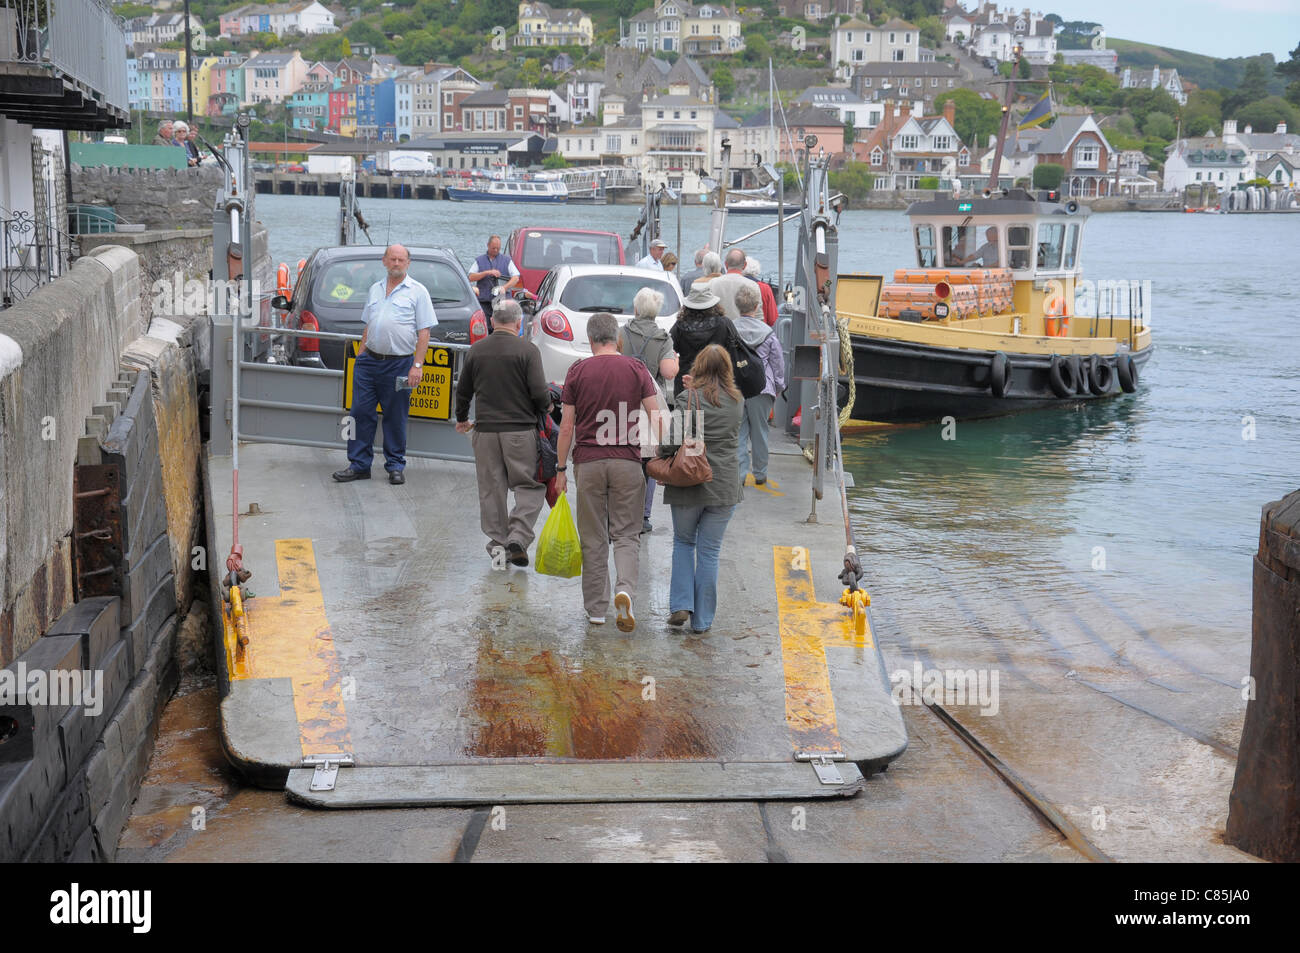 Foot passengers board the Lower Ferry to cross the River Dart from Dartmouth to Kingswear. Stock Photo